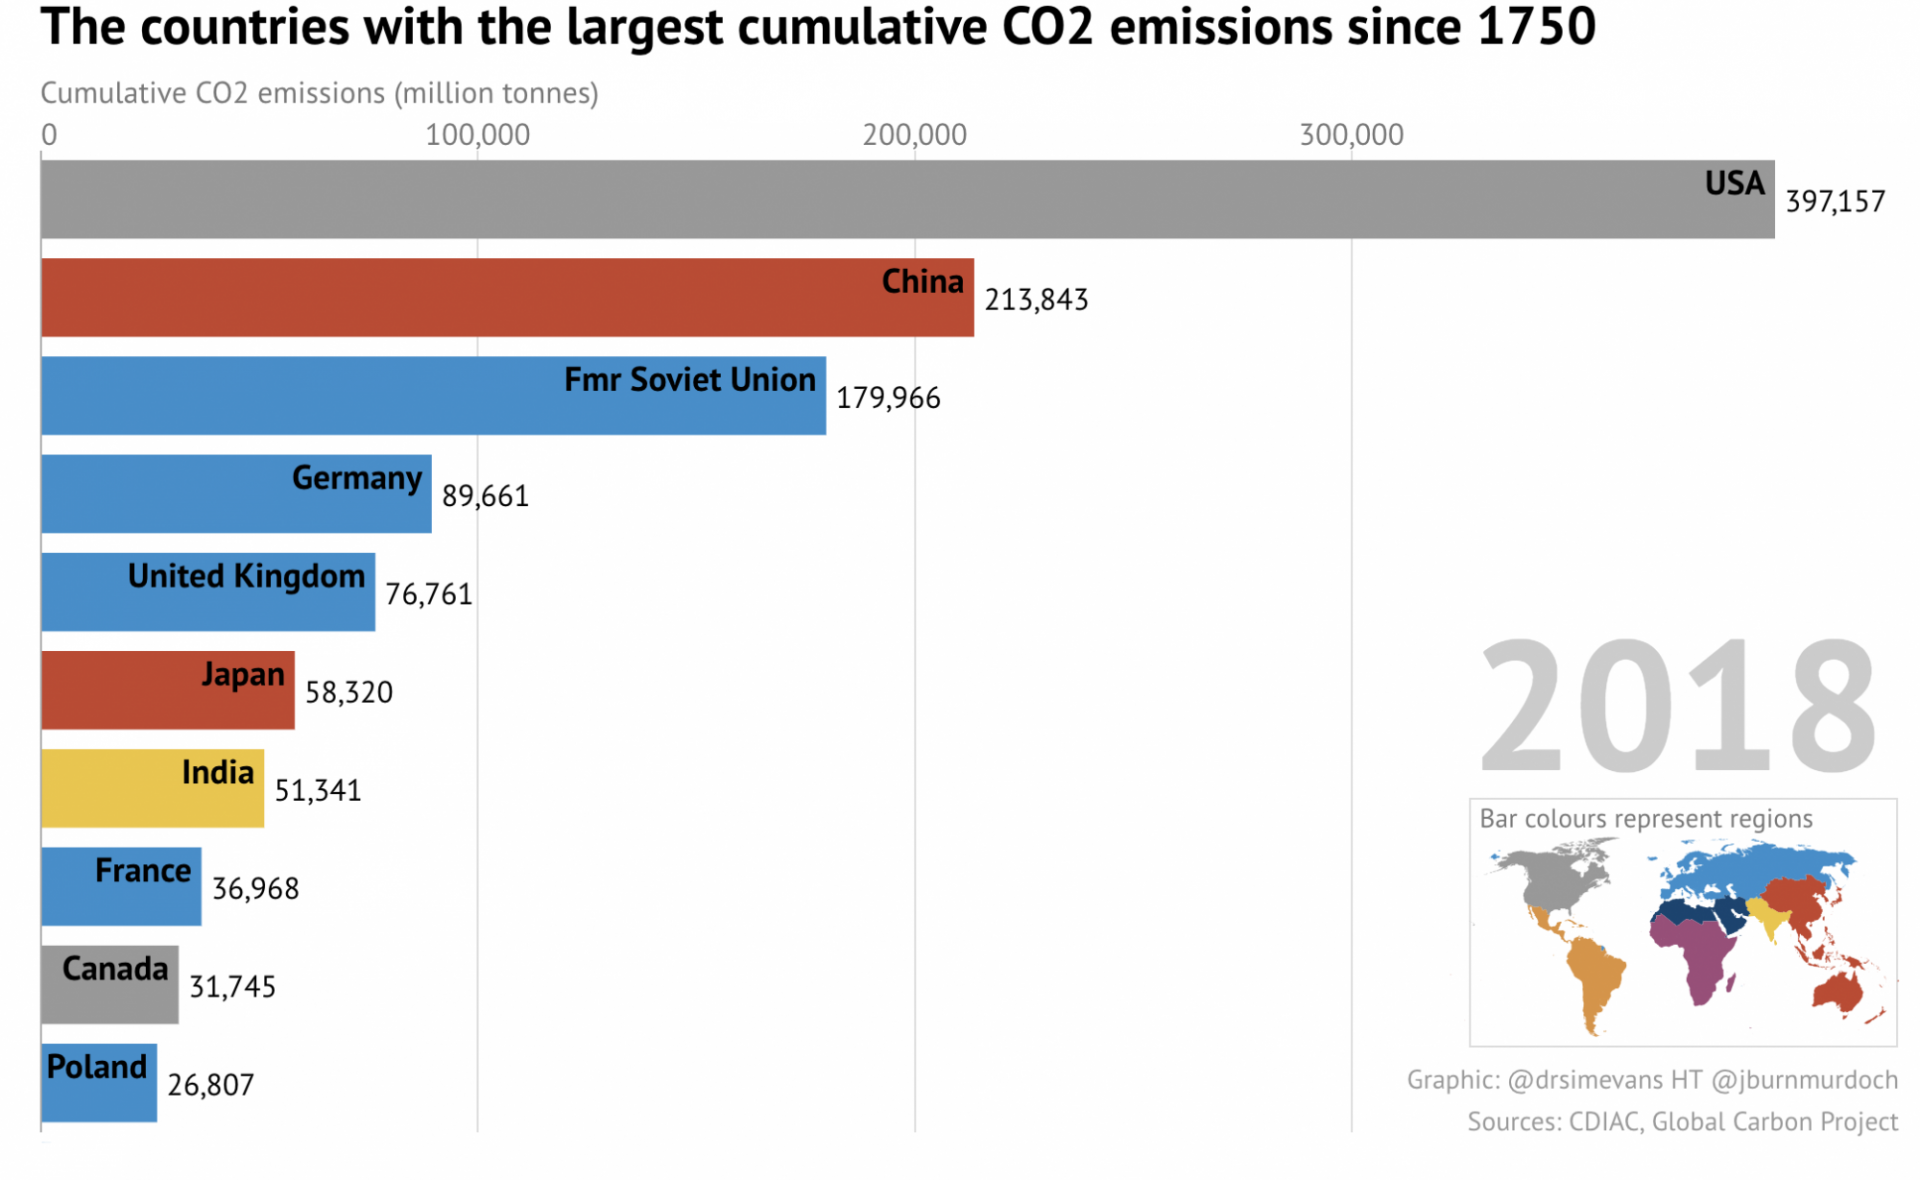 Graph showing the countries with the largest cumulative carbon dioxide emission since 1750 